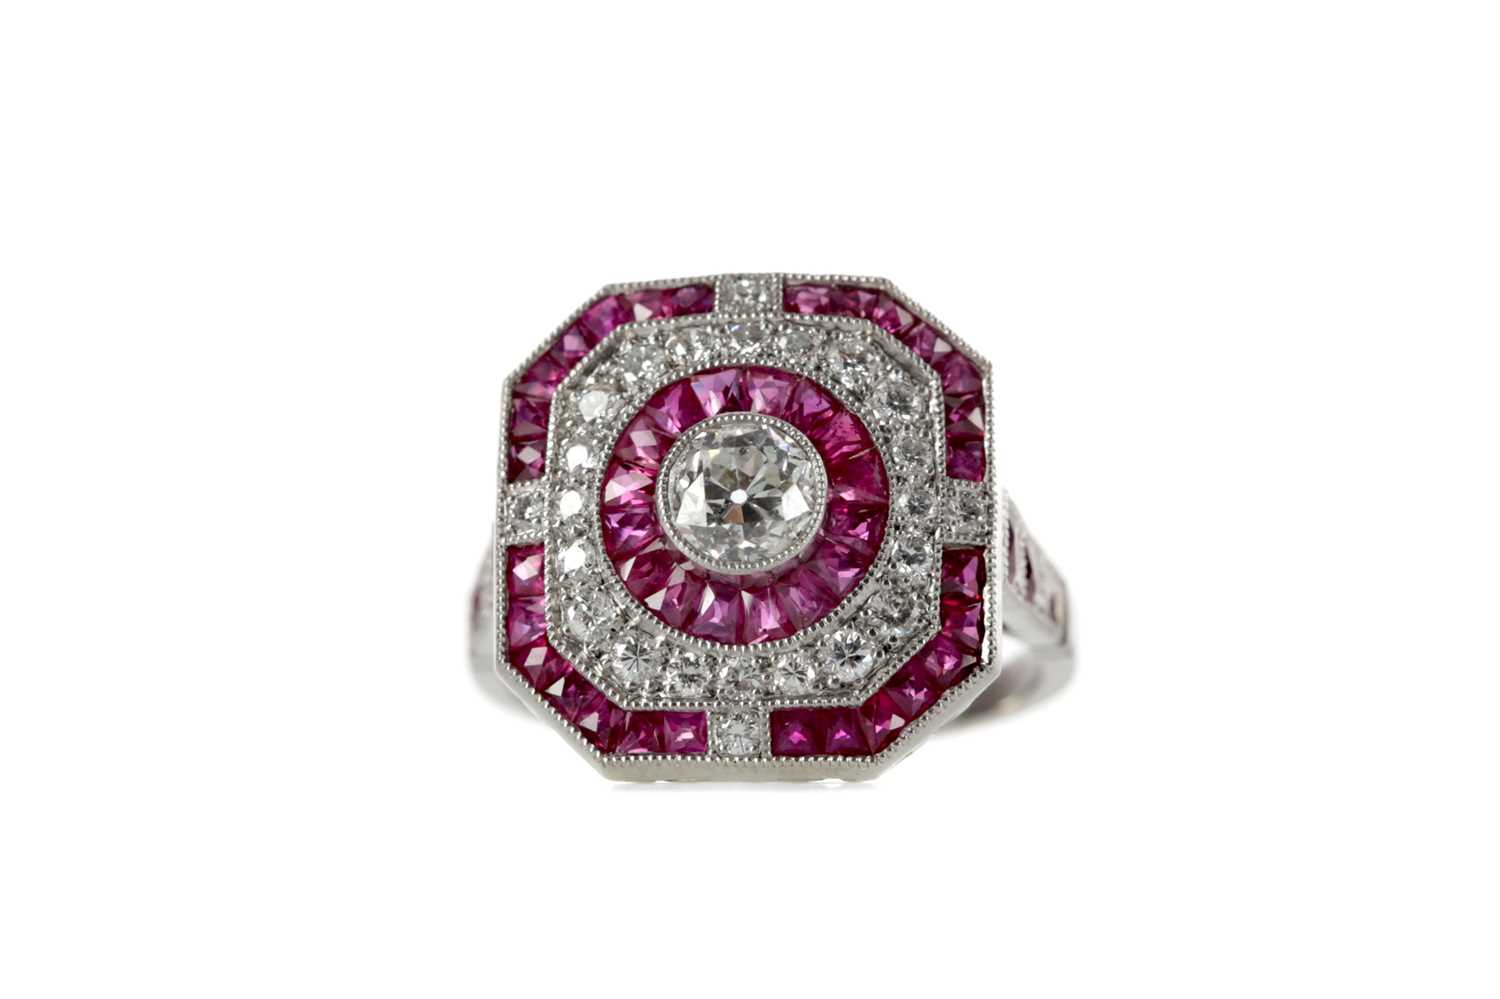 Lot 383 - A RUBY, SPINEL AND DIAMOND RING